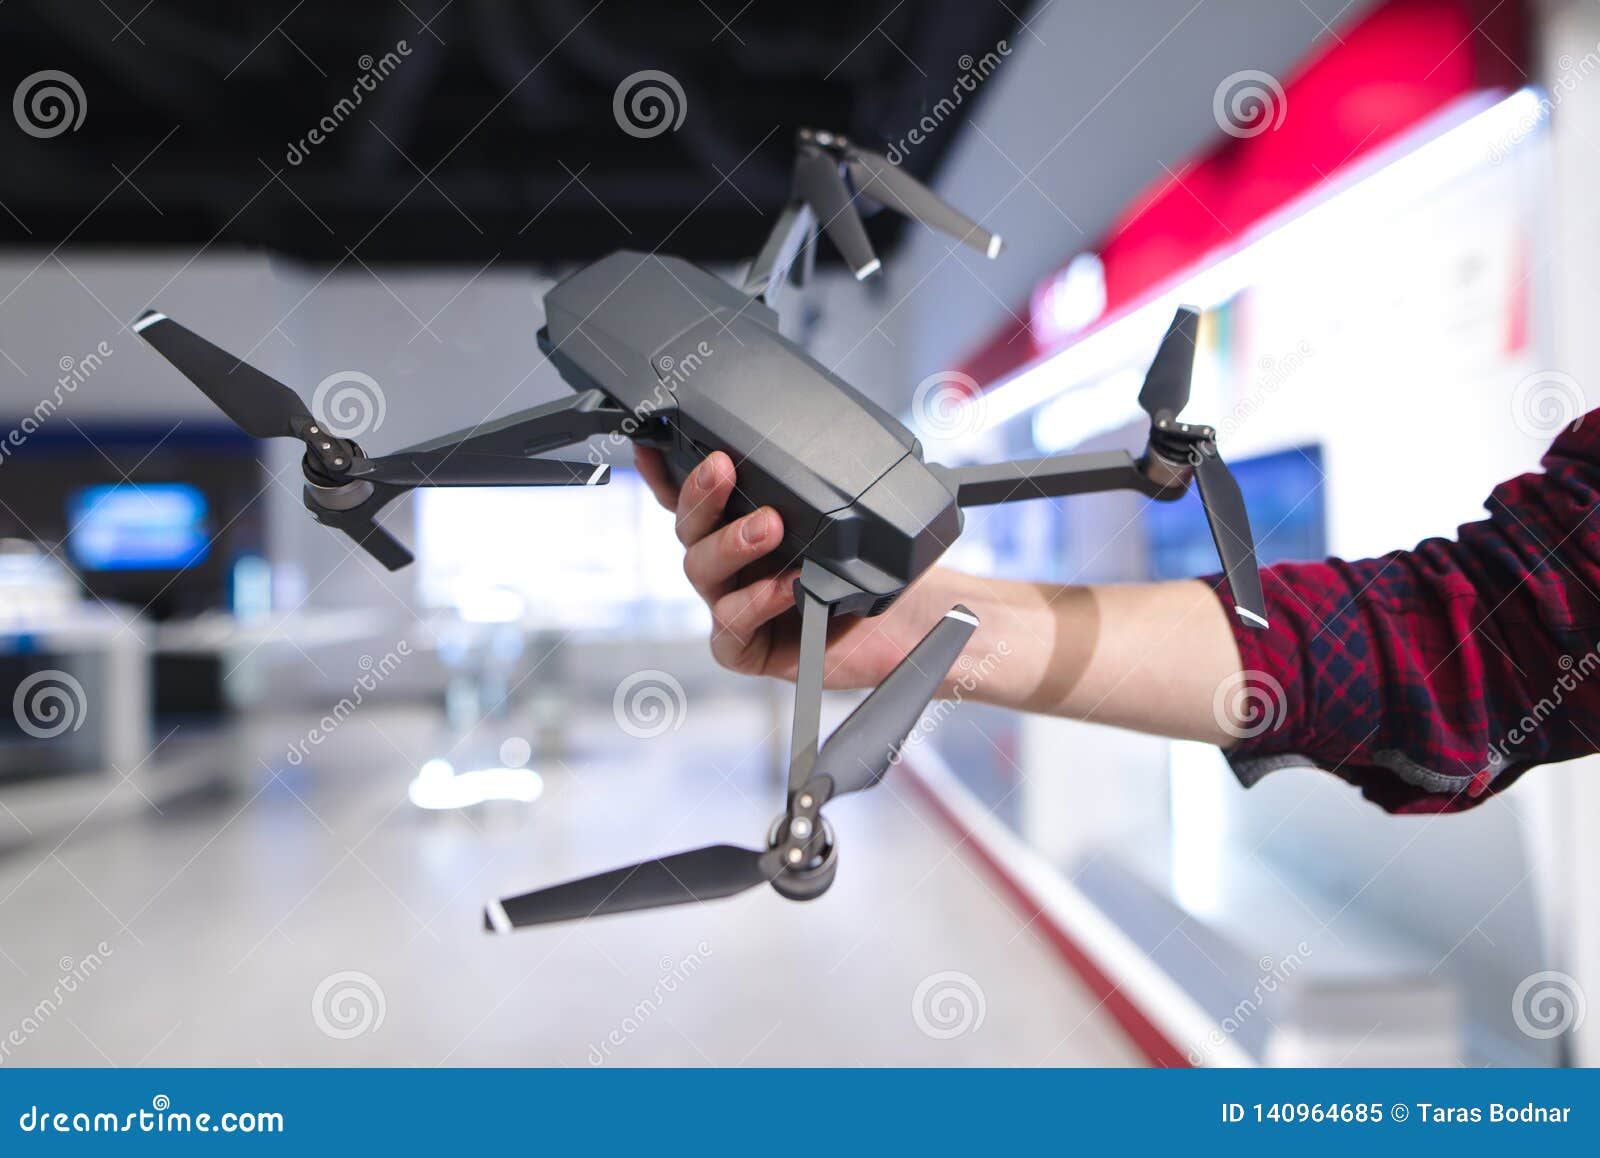 man`s hand holds a quadcopter in the background of a electronics store. purchase a dron in a hardware store